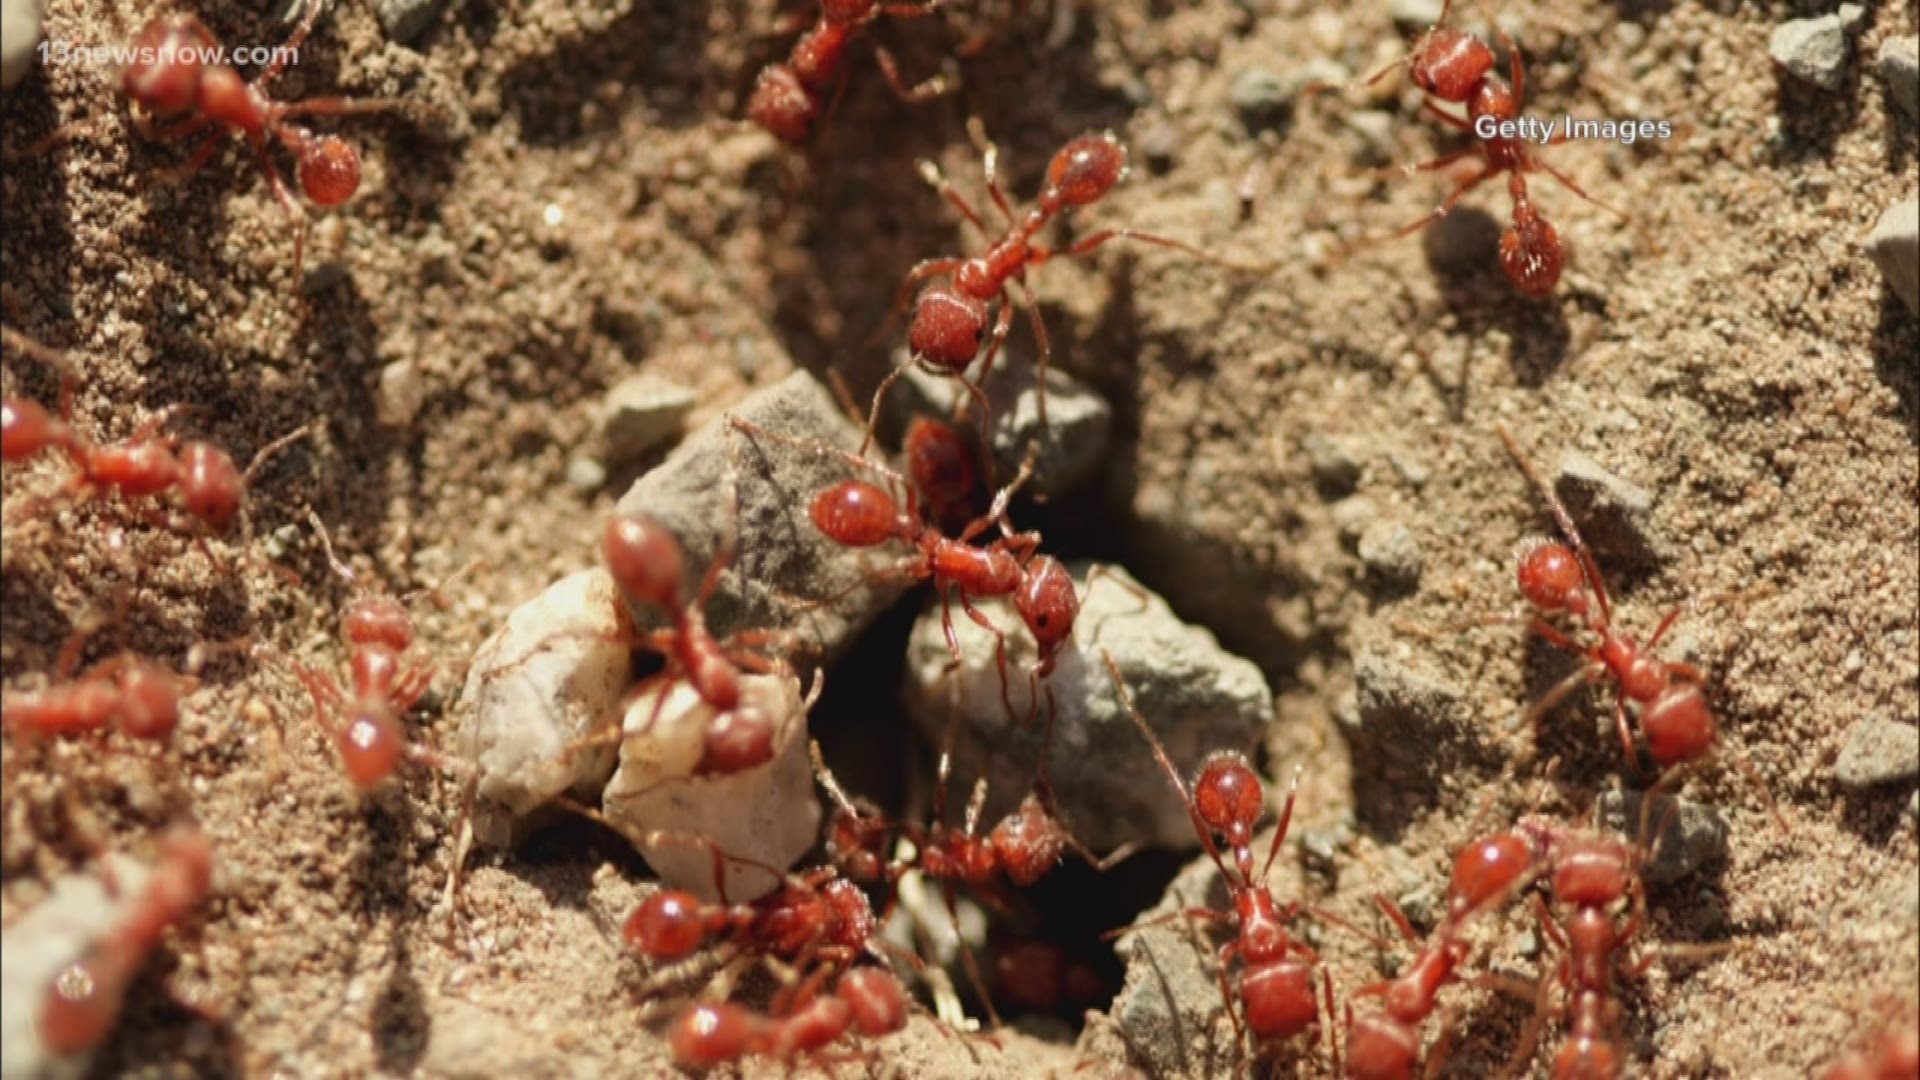 Soils, plants, equipment or basically anything else that comes in contact with the ground that ants could get into cannot be moved from the area.